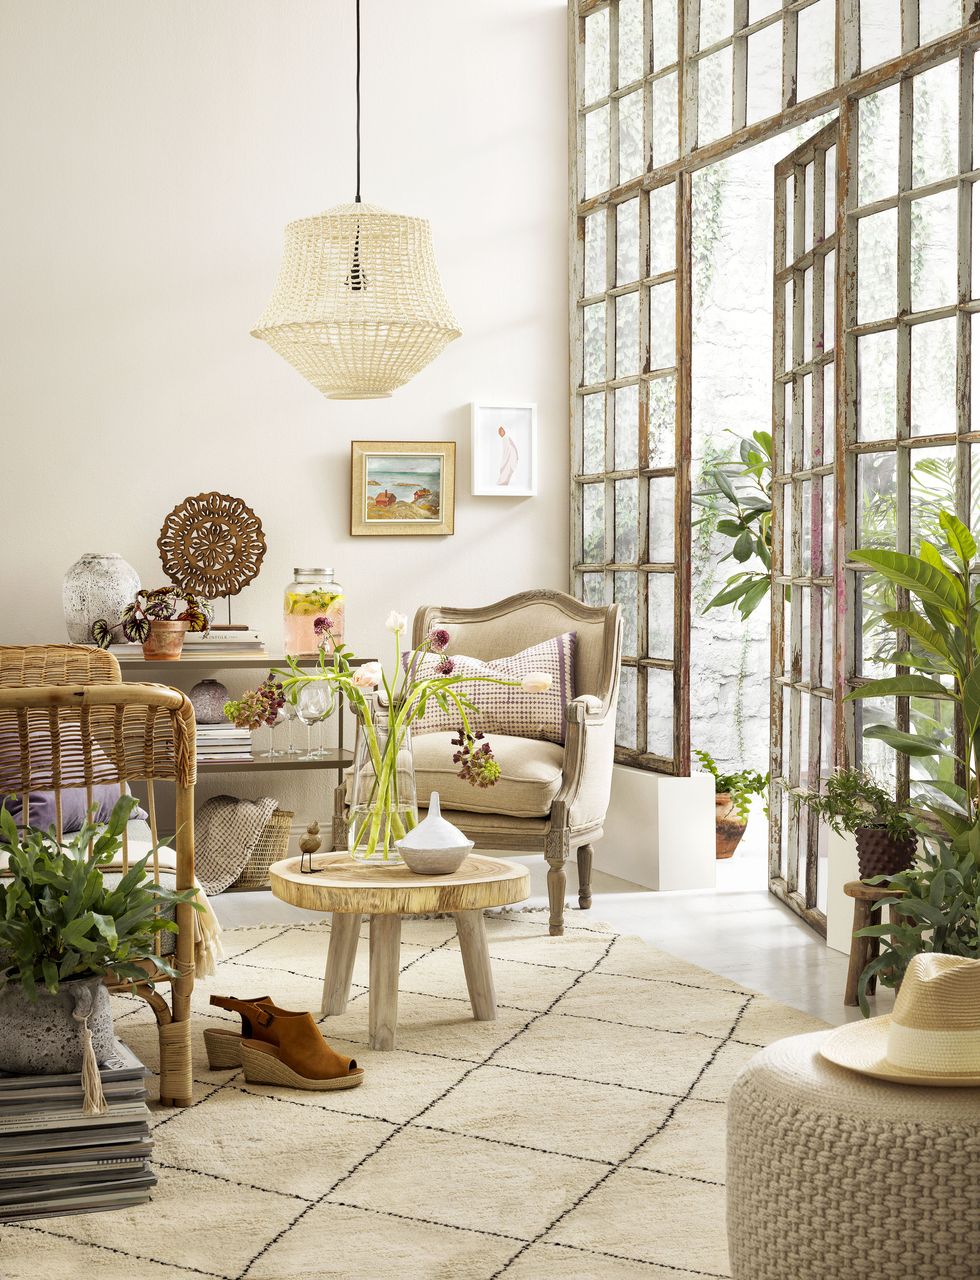 A light bohemian space that will make you dream of spring